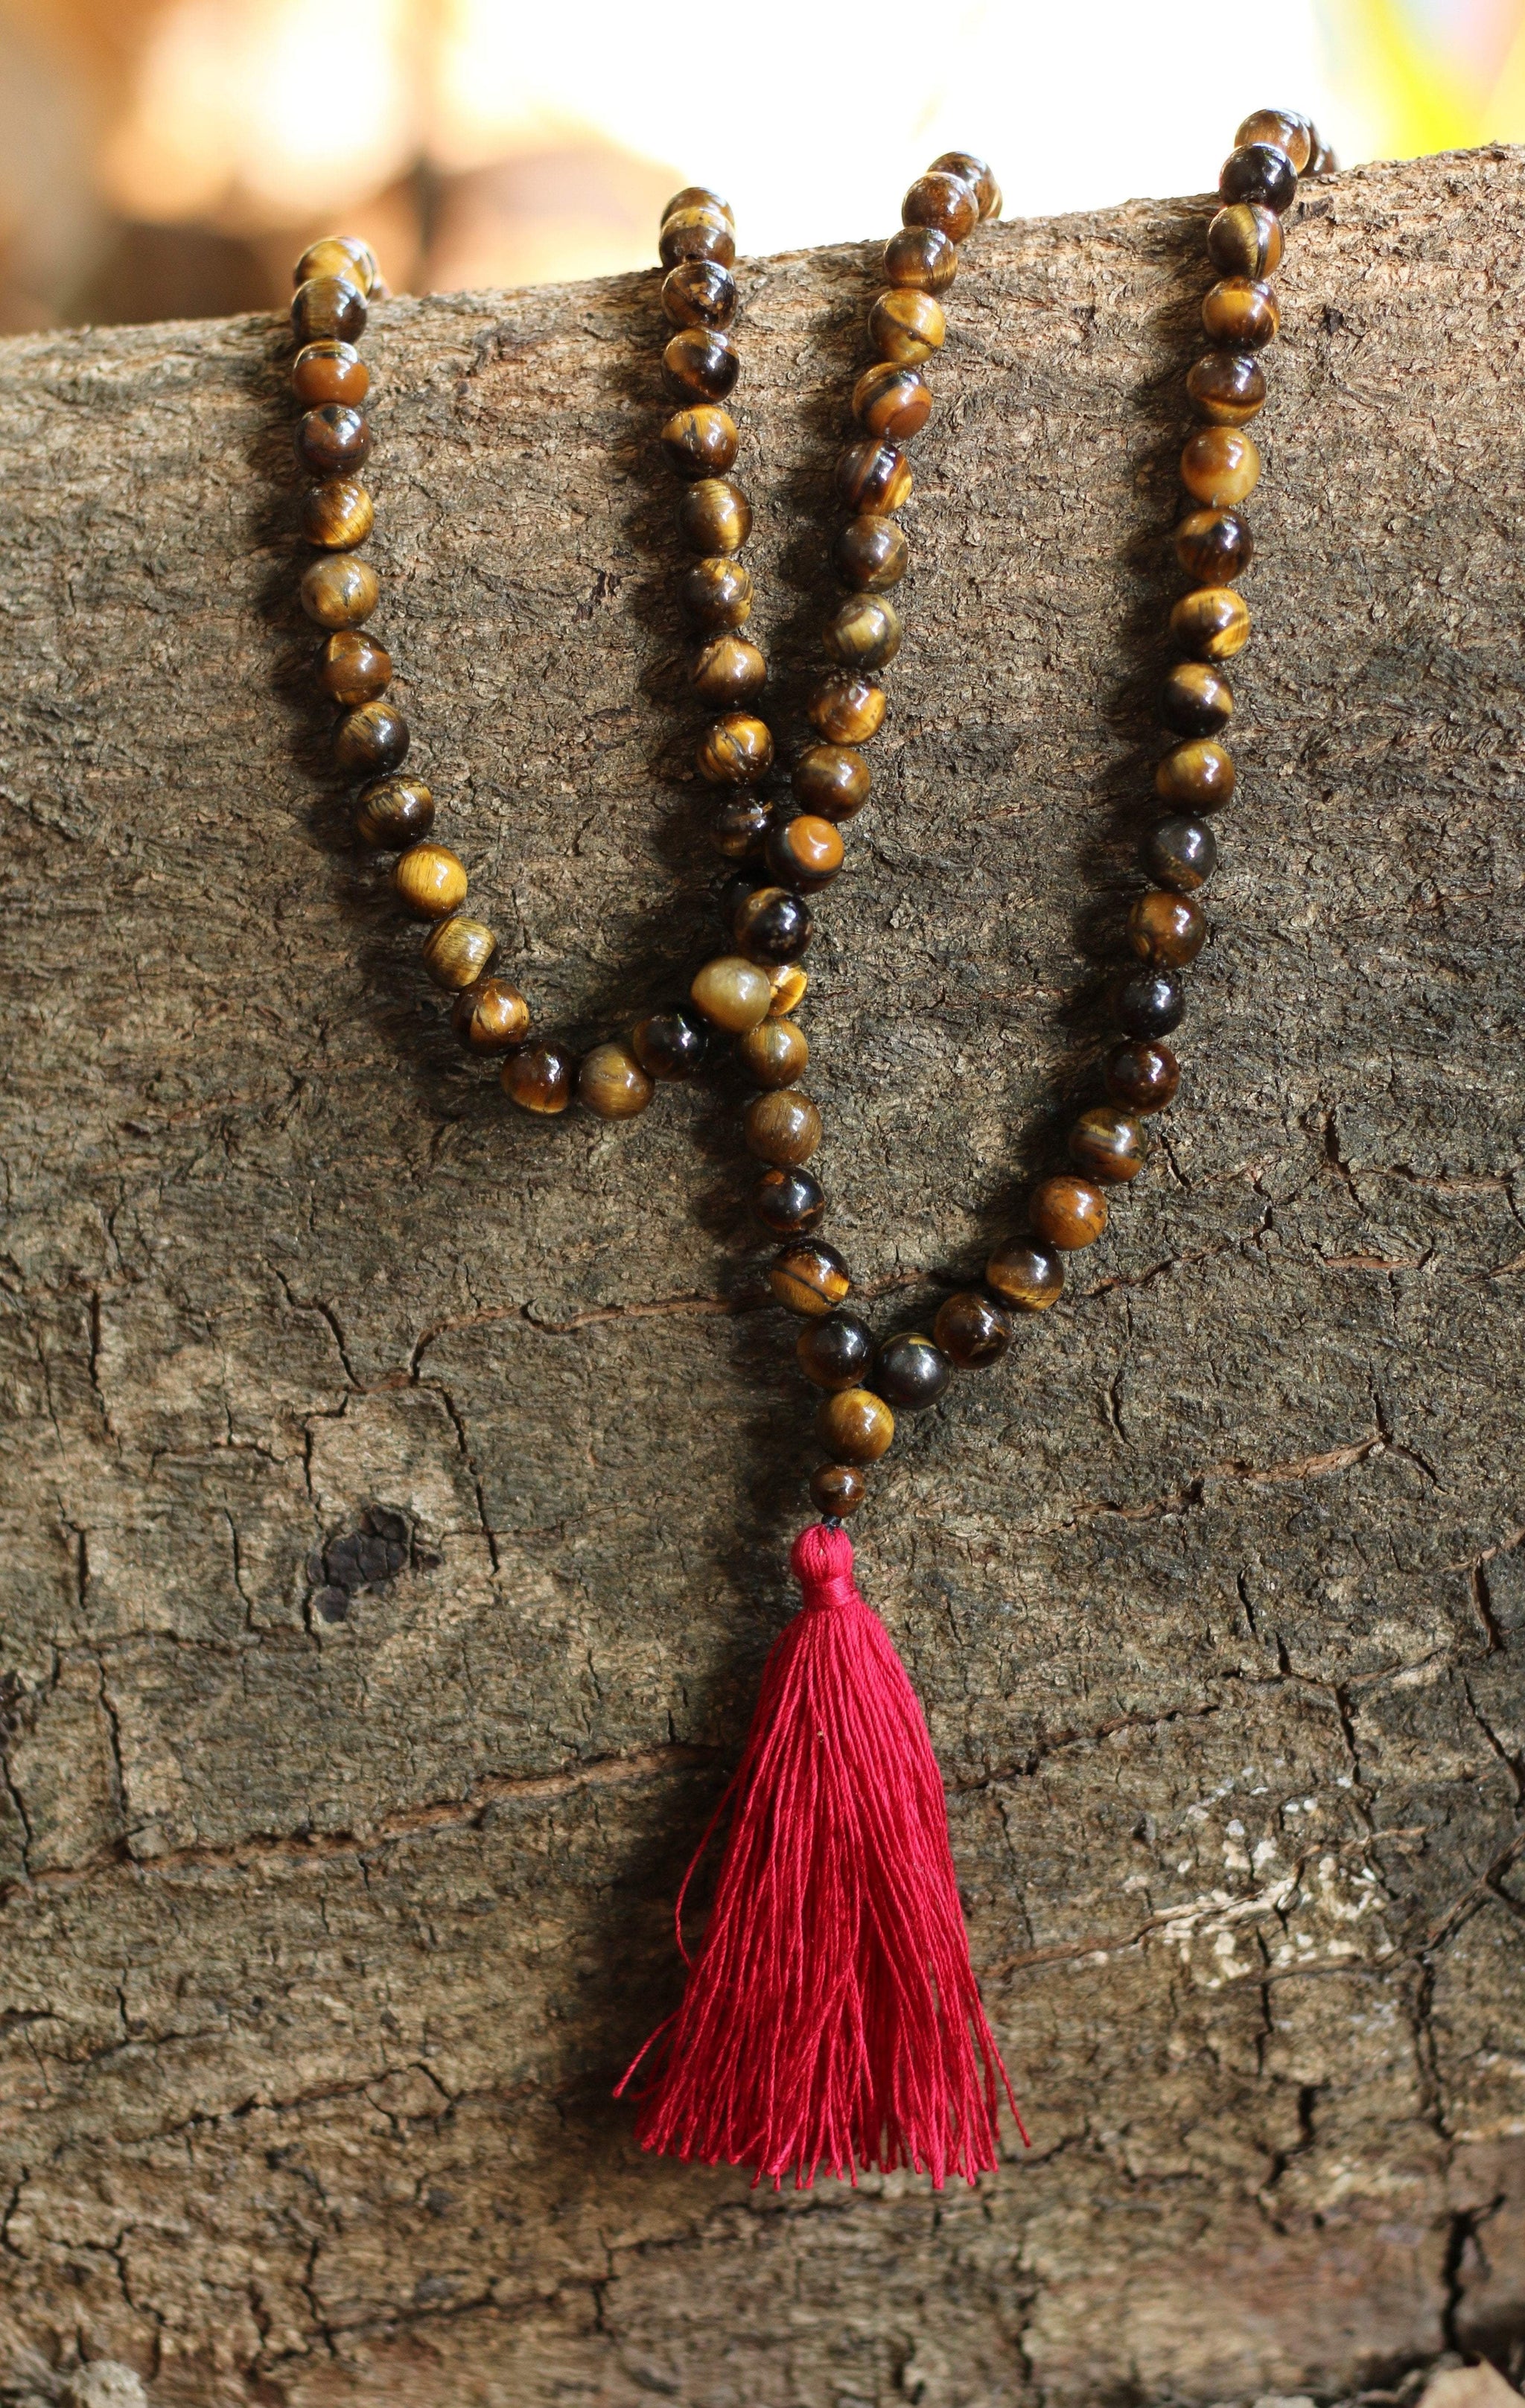 Rudraksha Buddhist Mala Beads Necklace with Red Tassels - One